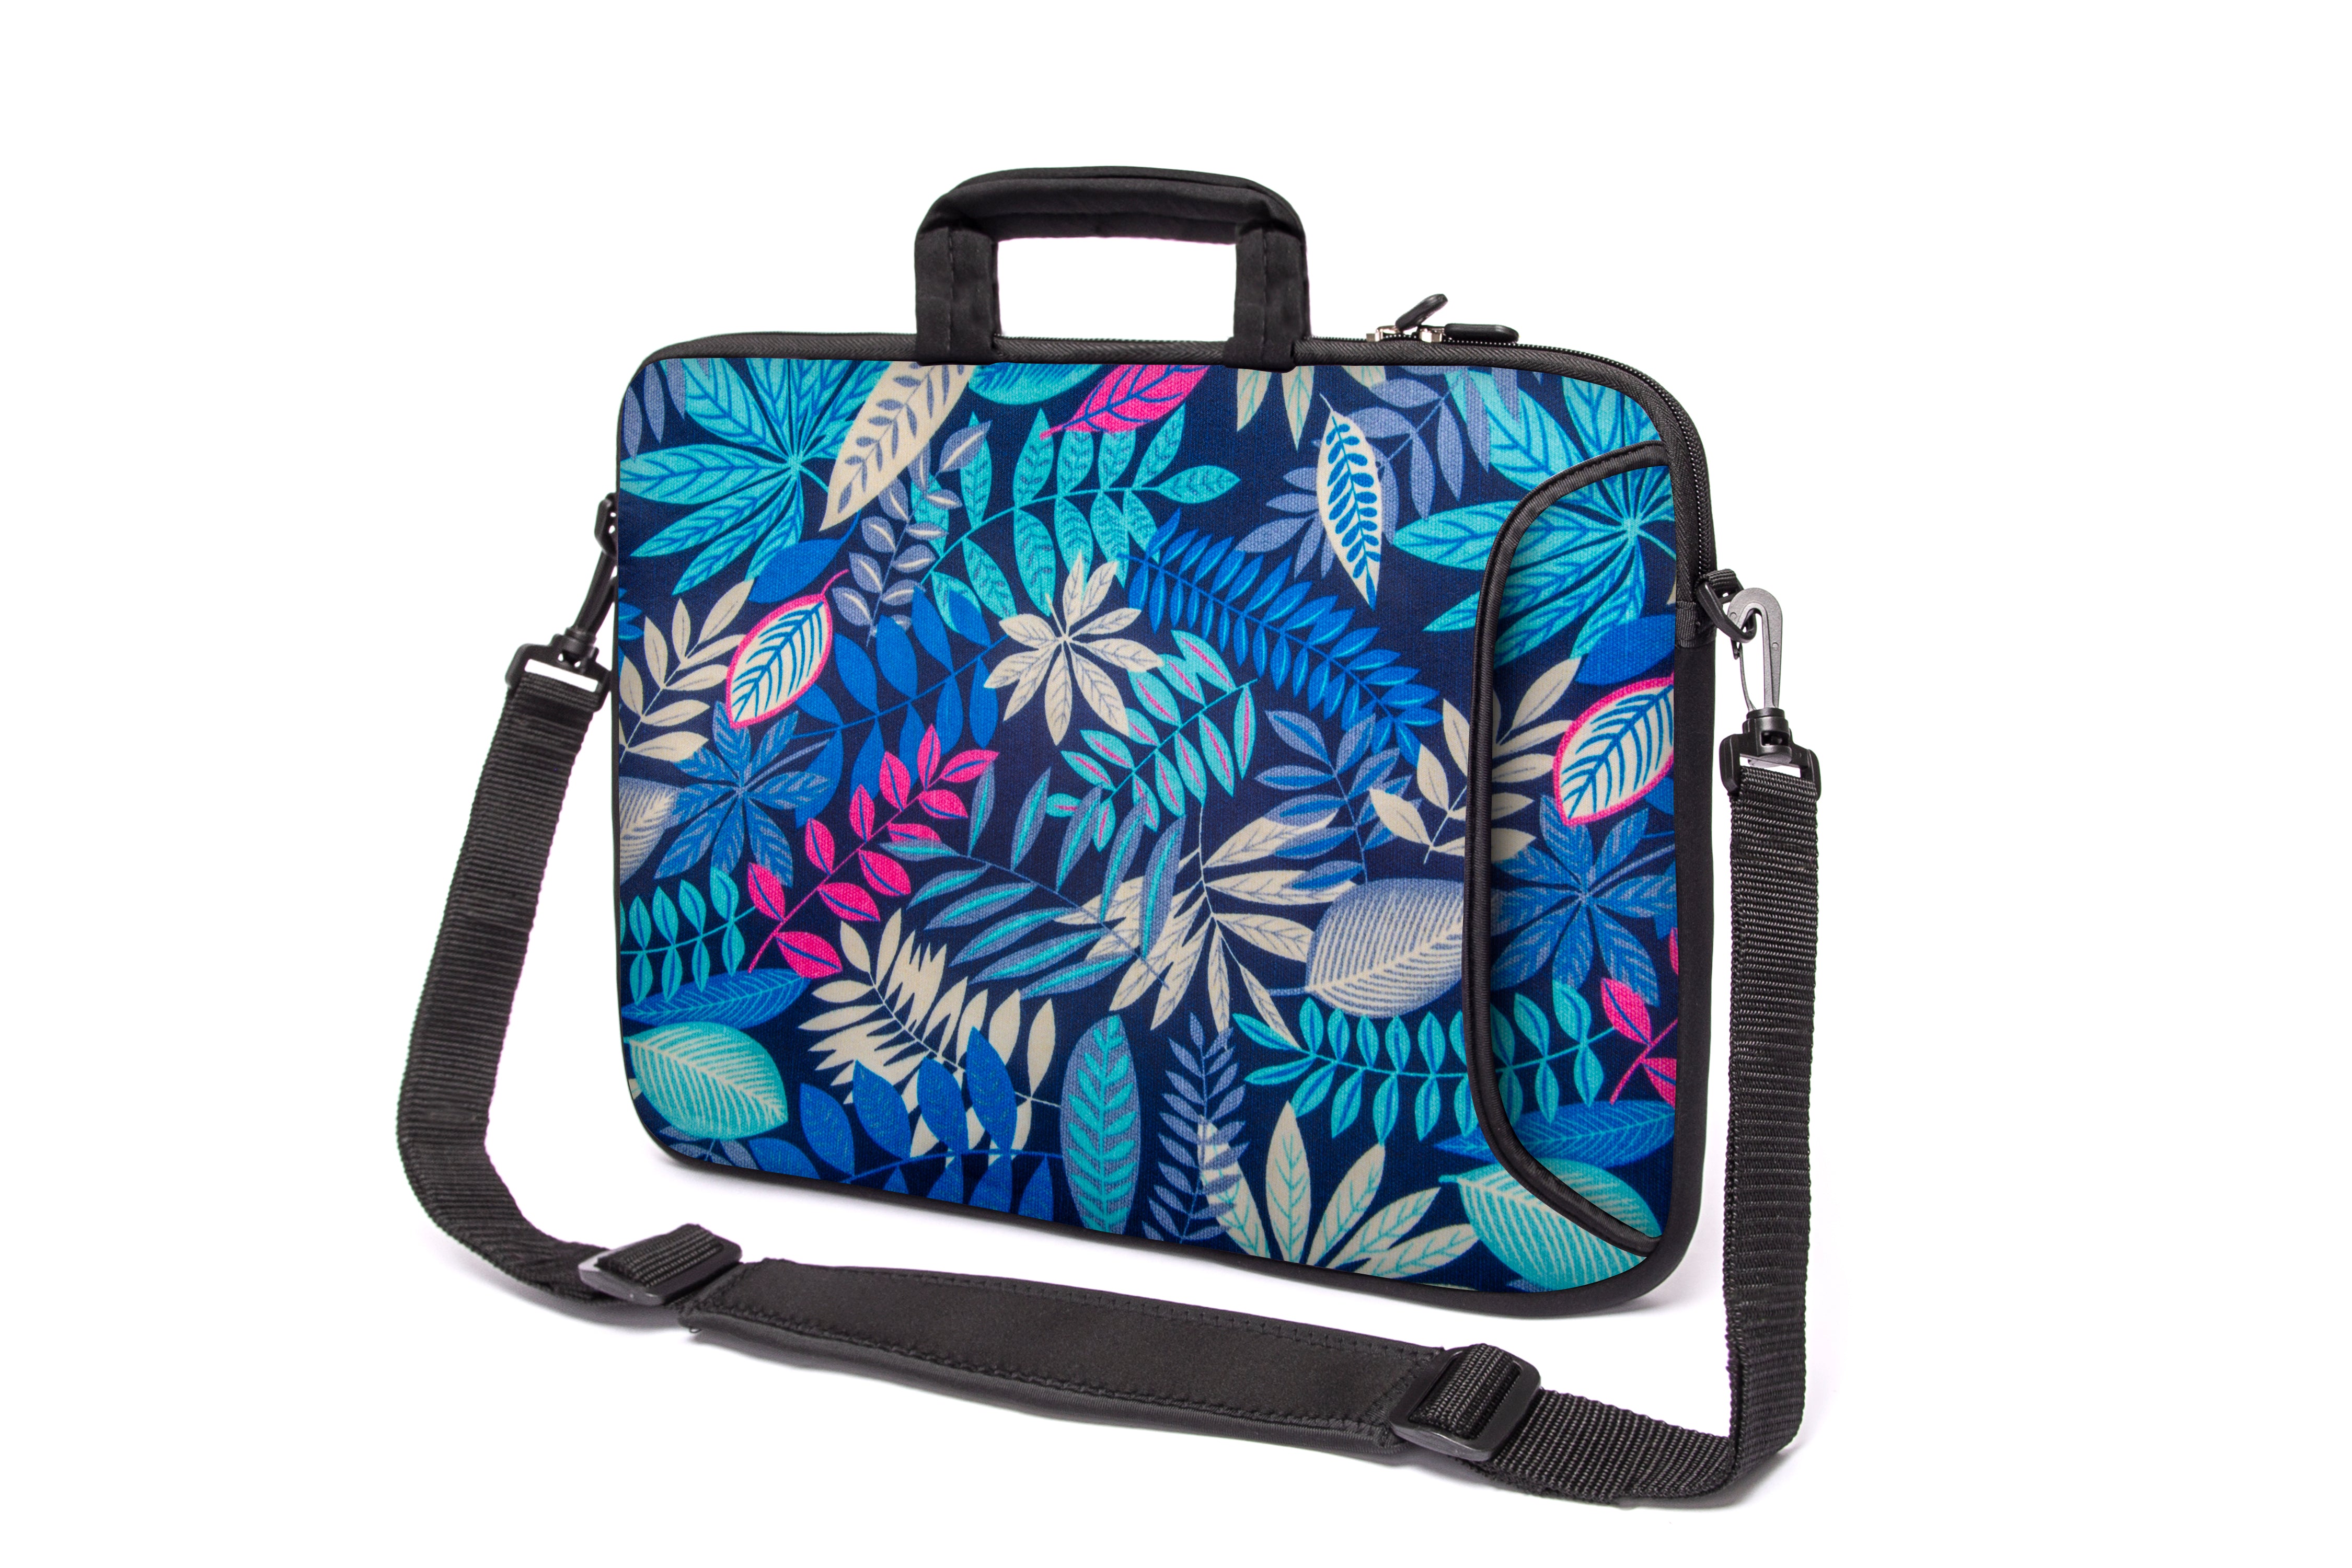 17"- 17.3" (inch) LAPTOP BAG/CASE WITH HANDLE & STRAP, NEOPRENE MADE FOR LAPTOPS/NOTEBOOKS, ZIPPED*BLUE FOREST*